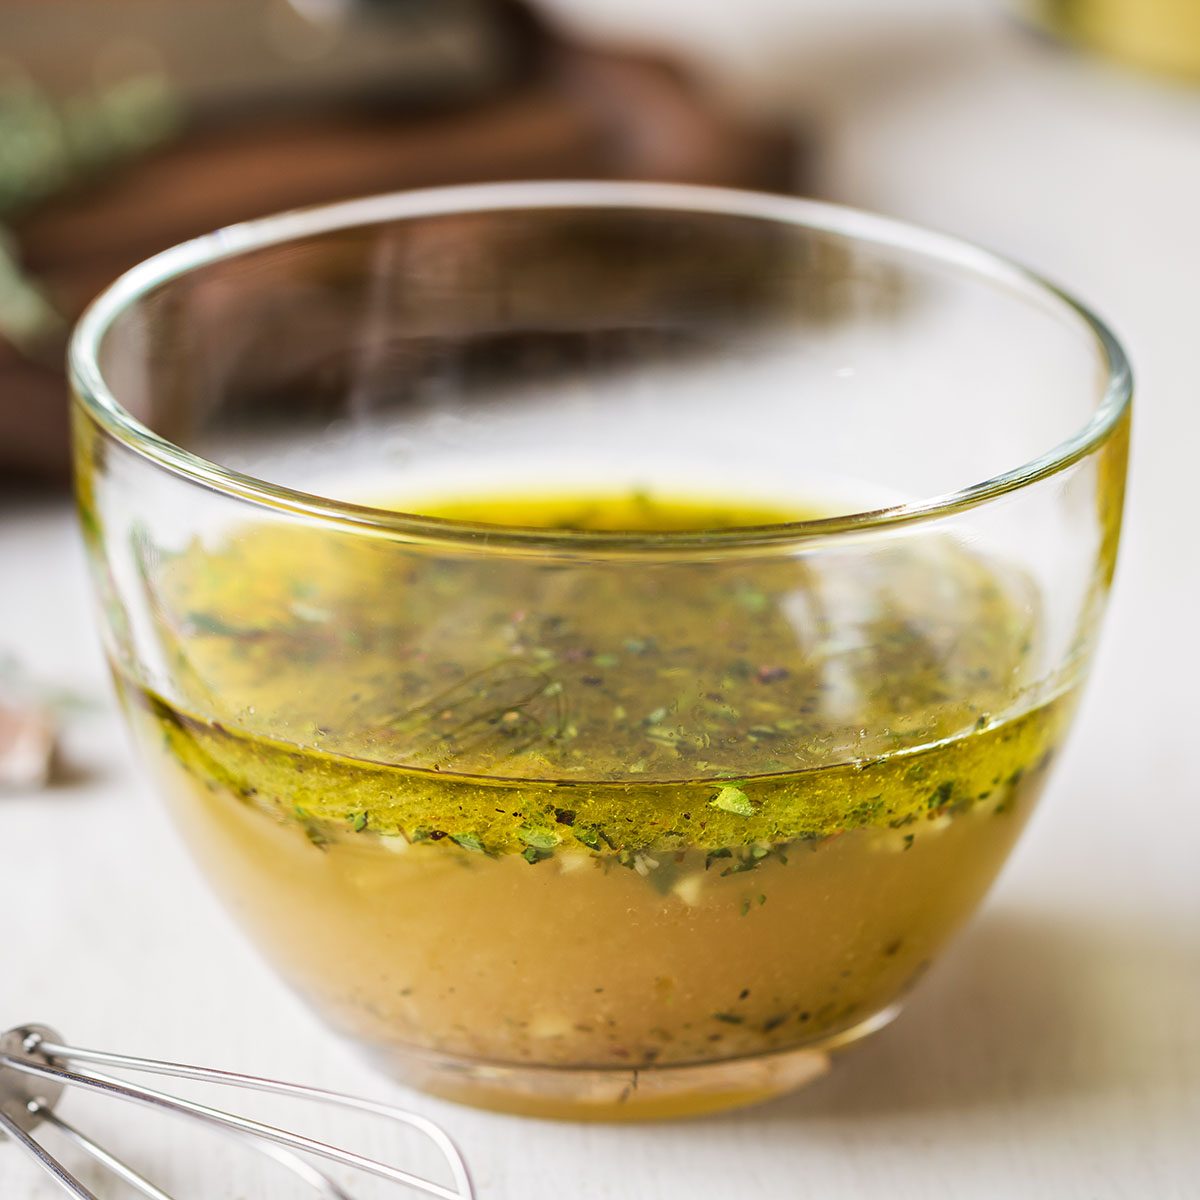 Homemade Vinaigrette with Thyme by fresh ingredients